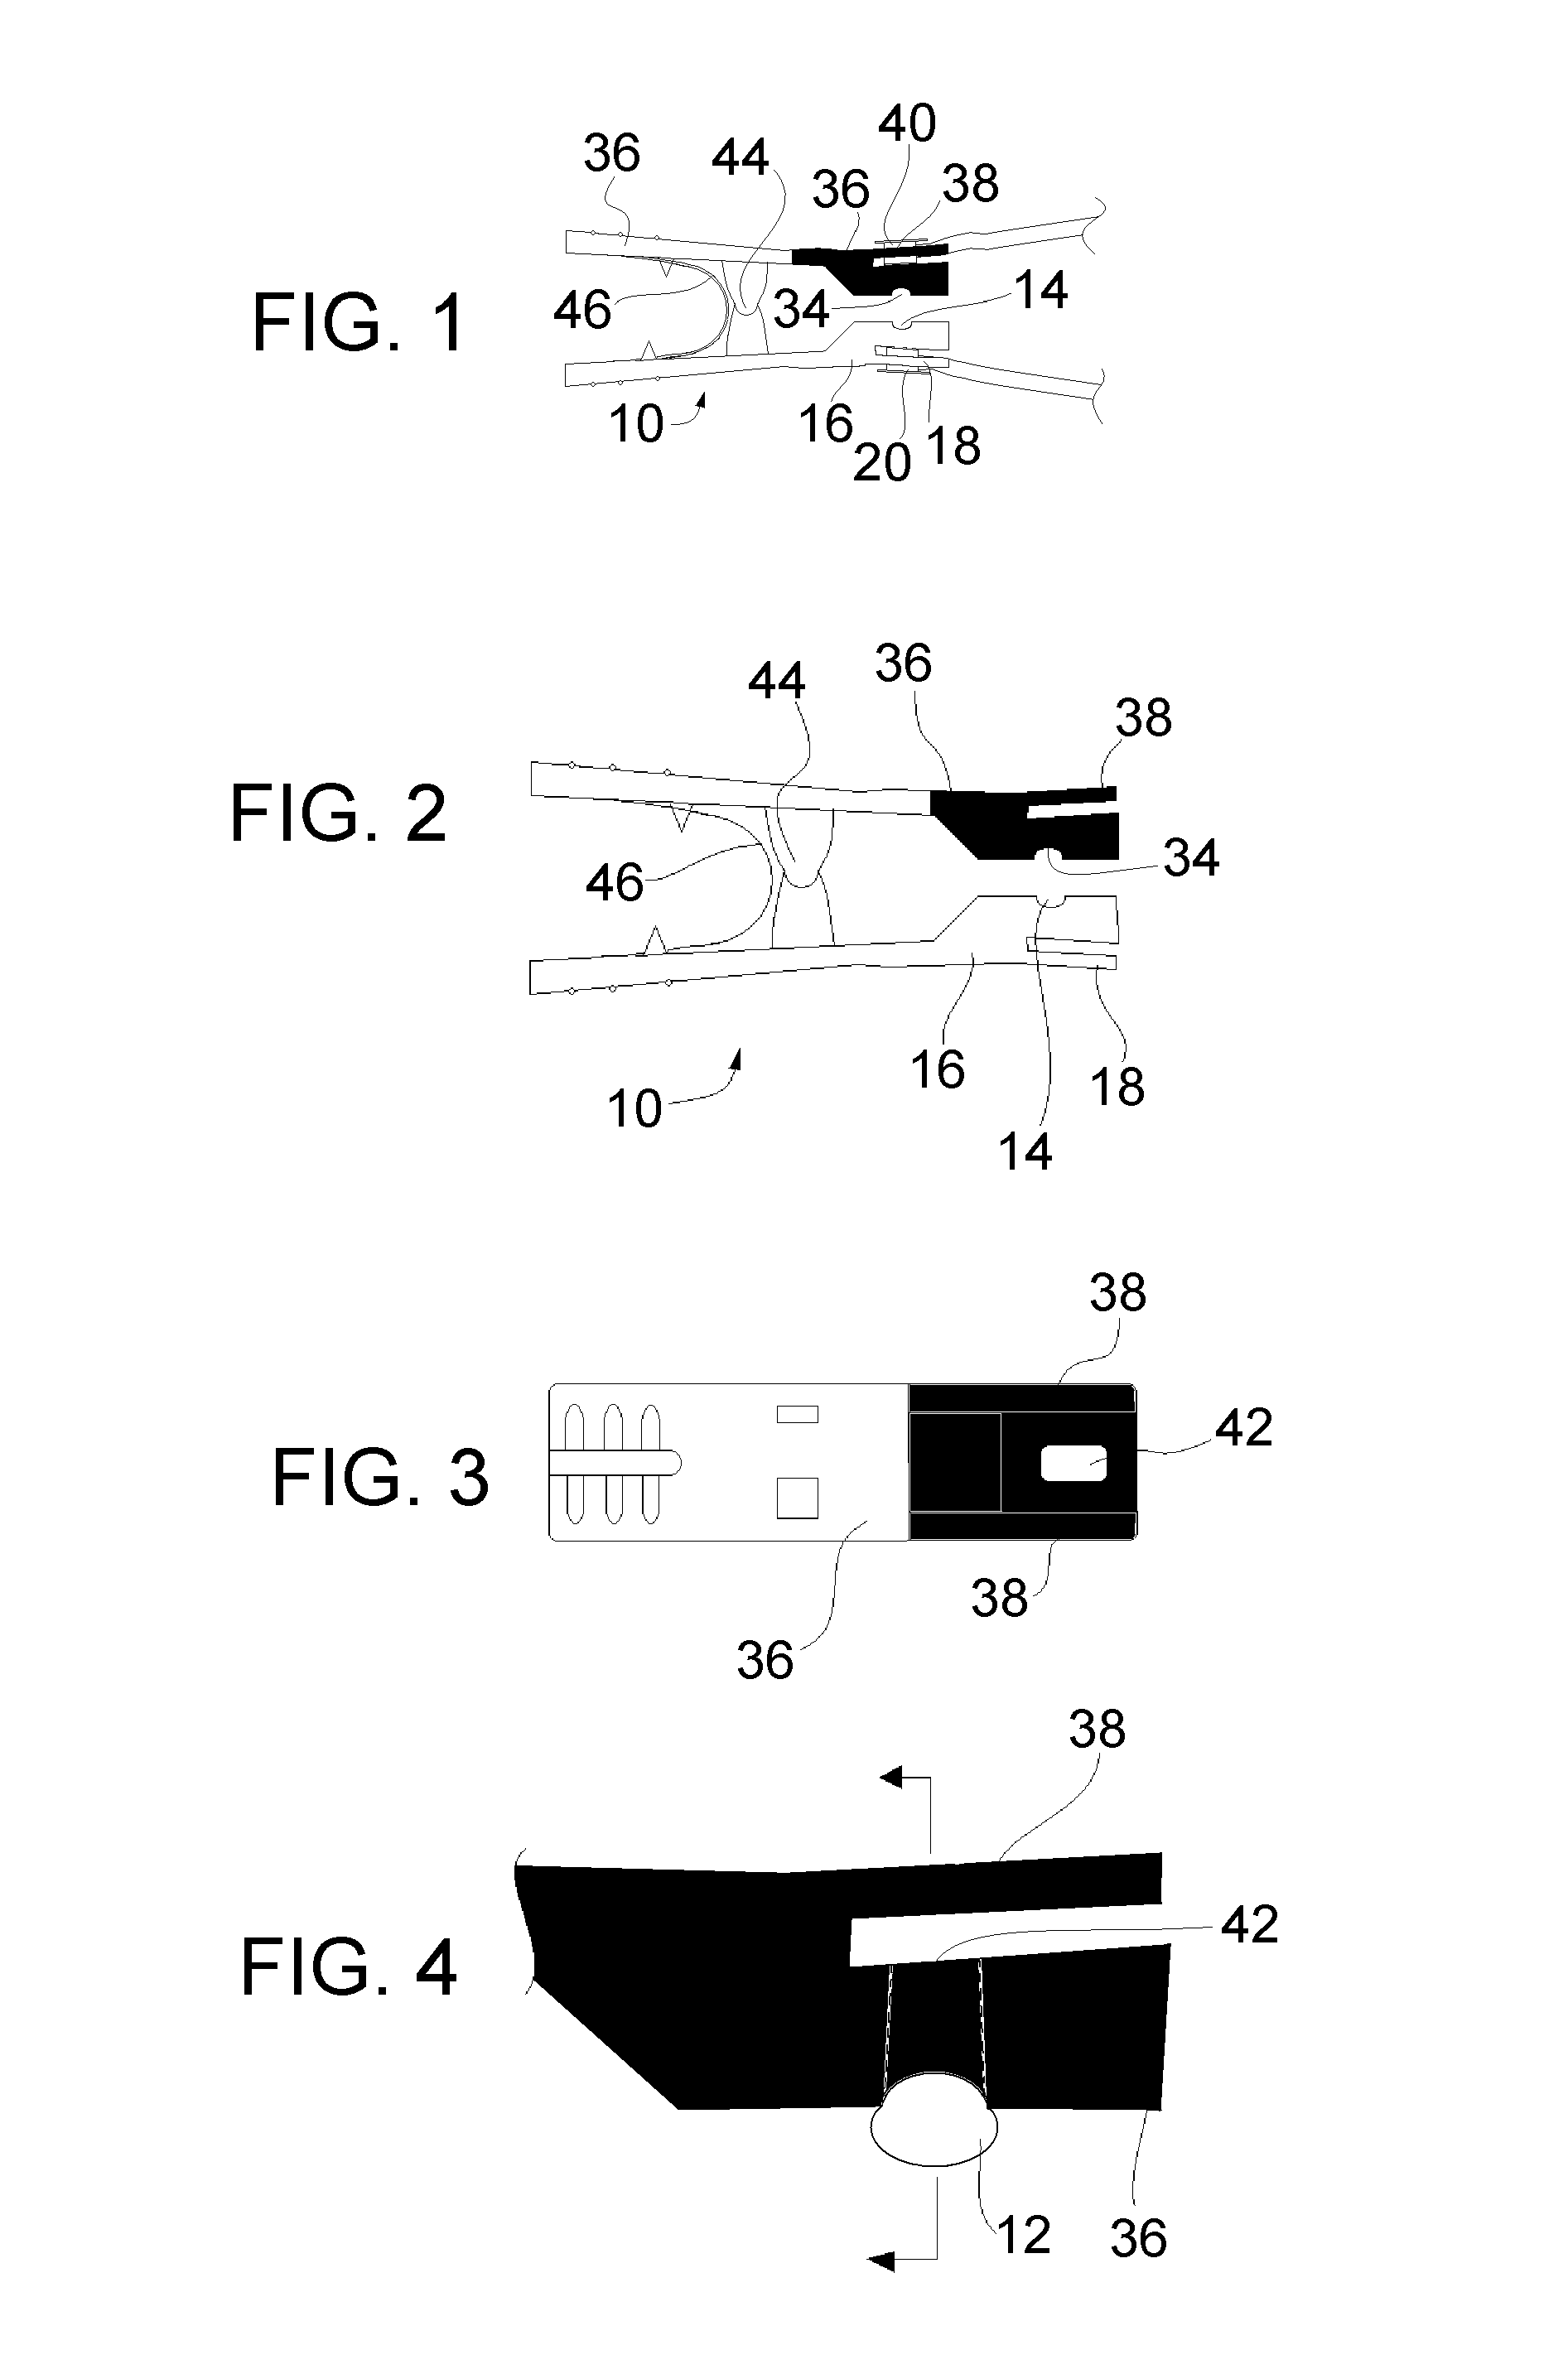 Tail Mounting Clip for Securely Mounting Sensor to Tail and a Tail Mounted Pulse Oximetry Sensor System Using Same